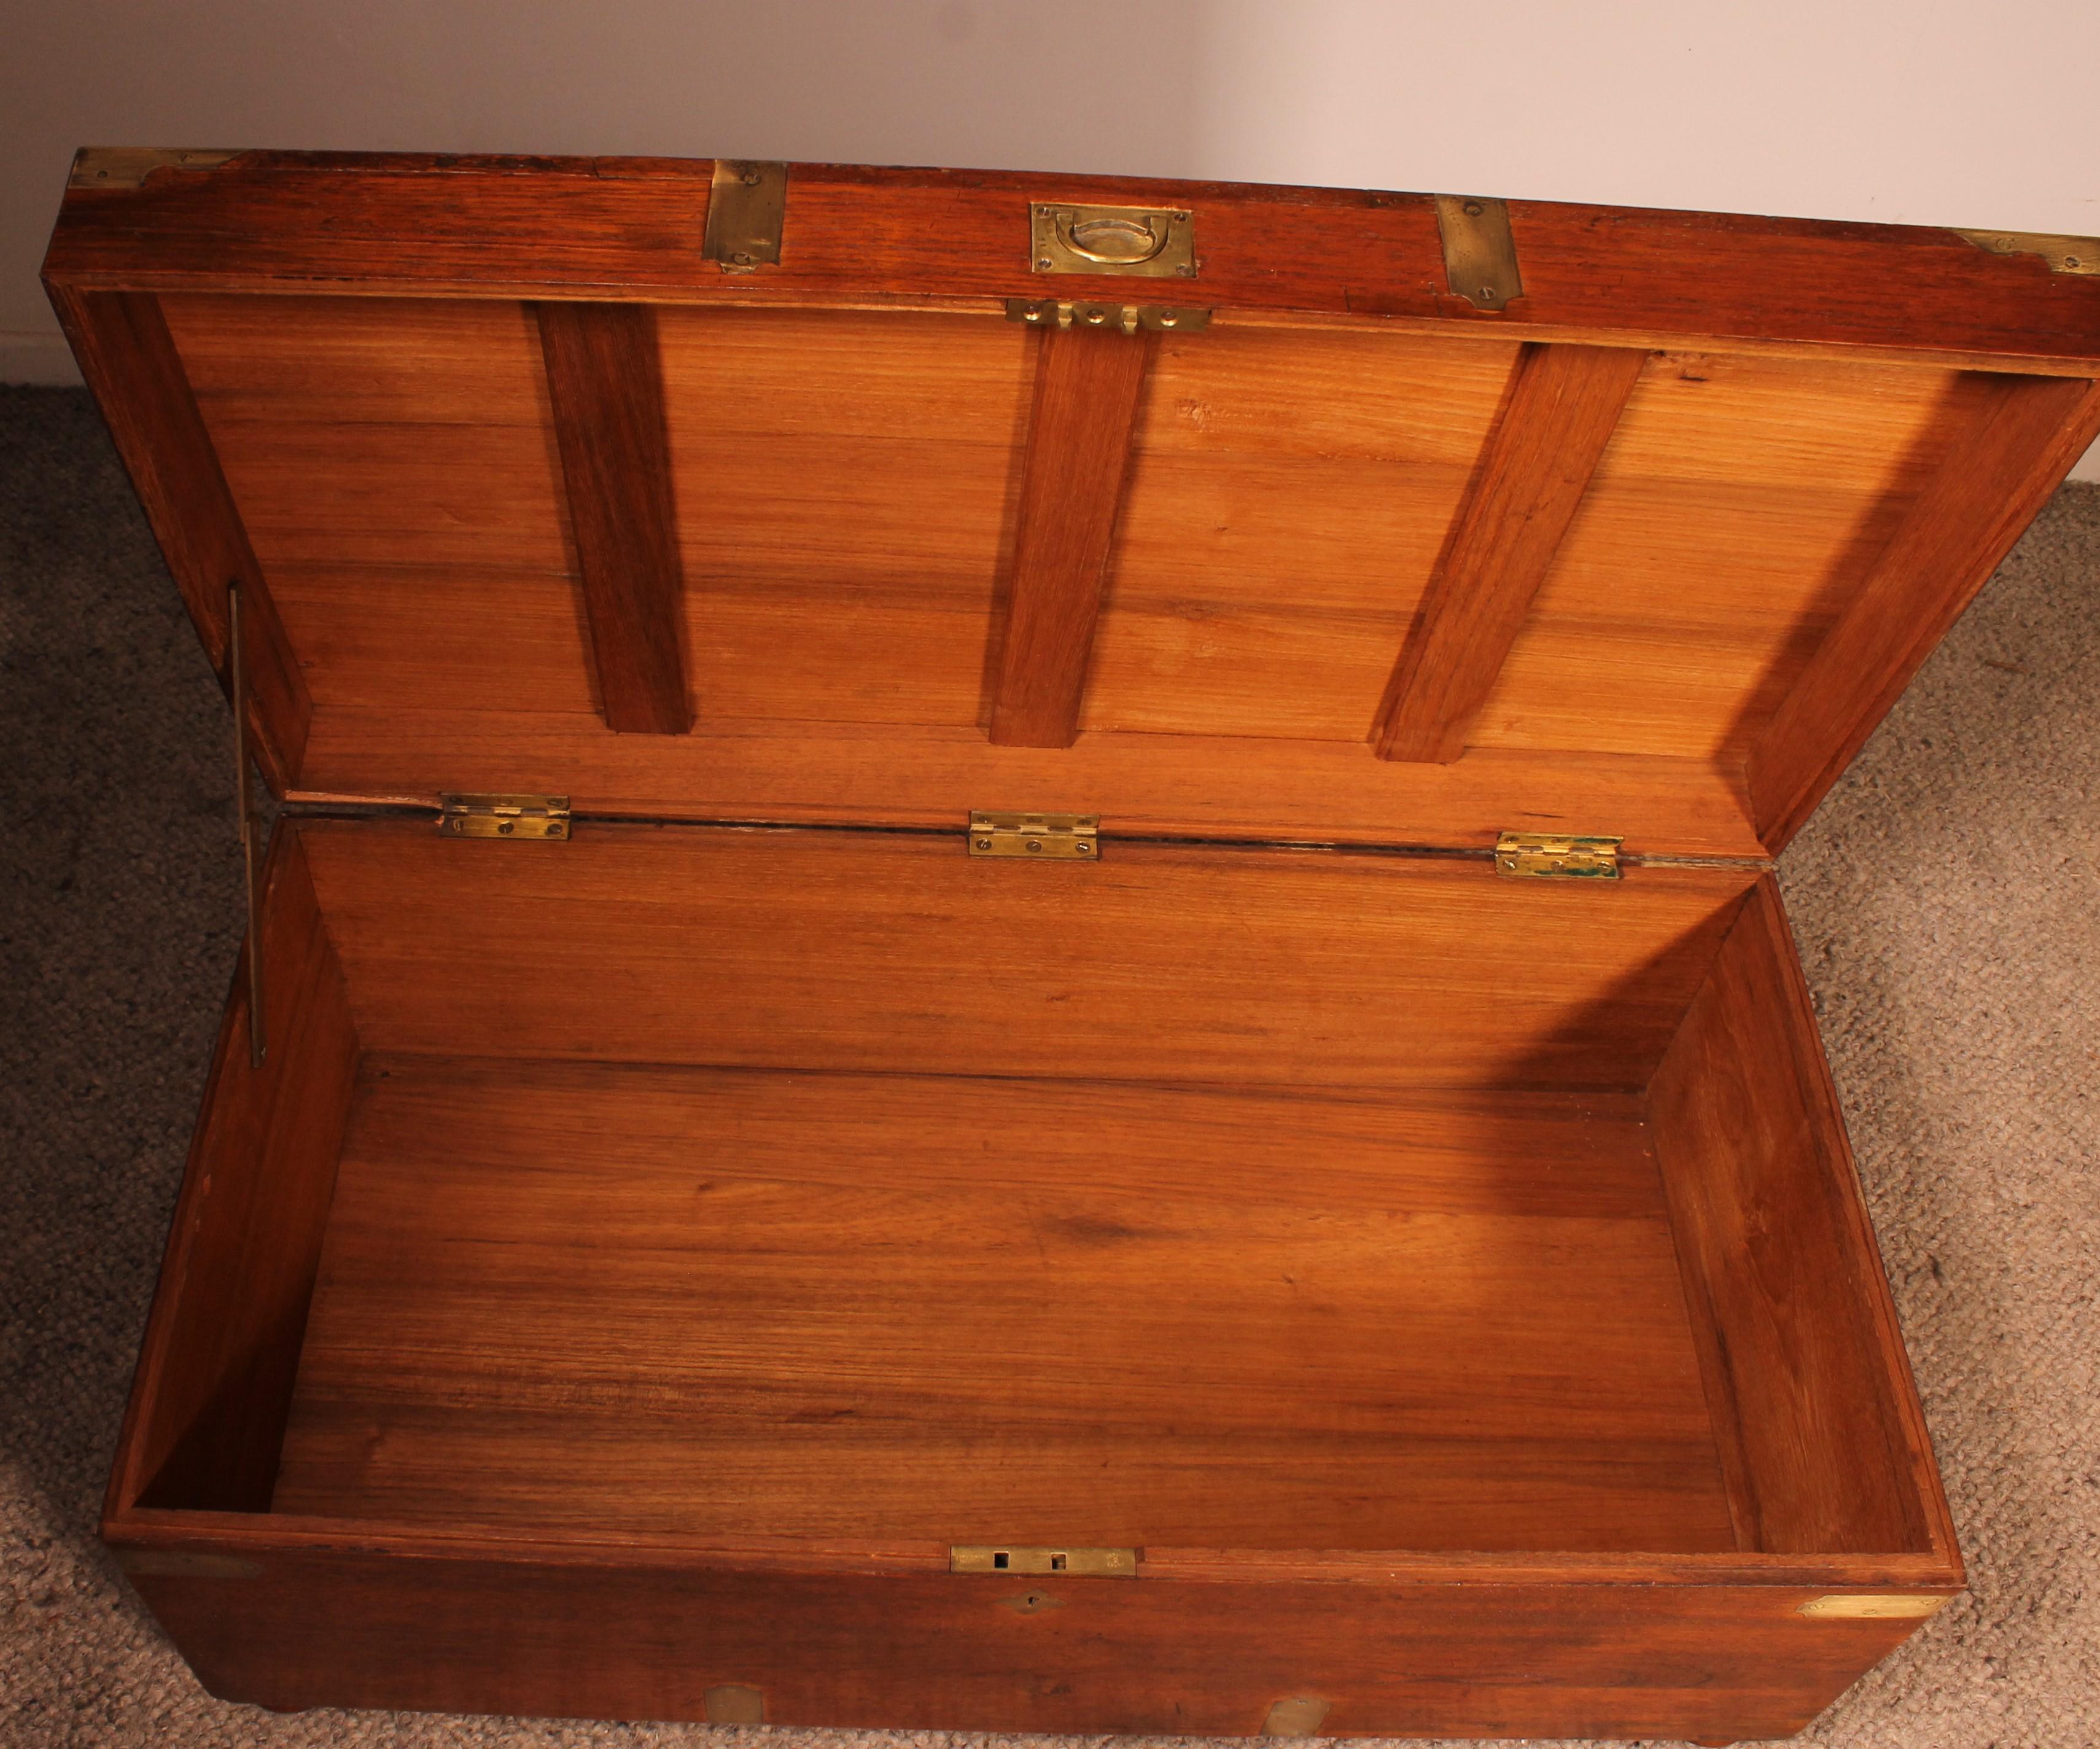 Teak Campaign Or Marine Chest From The 19th Century 5